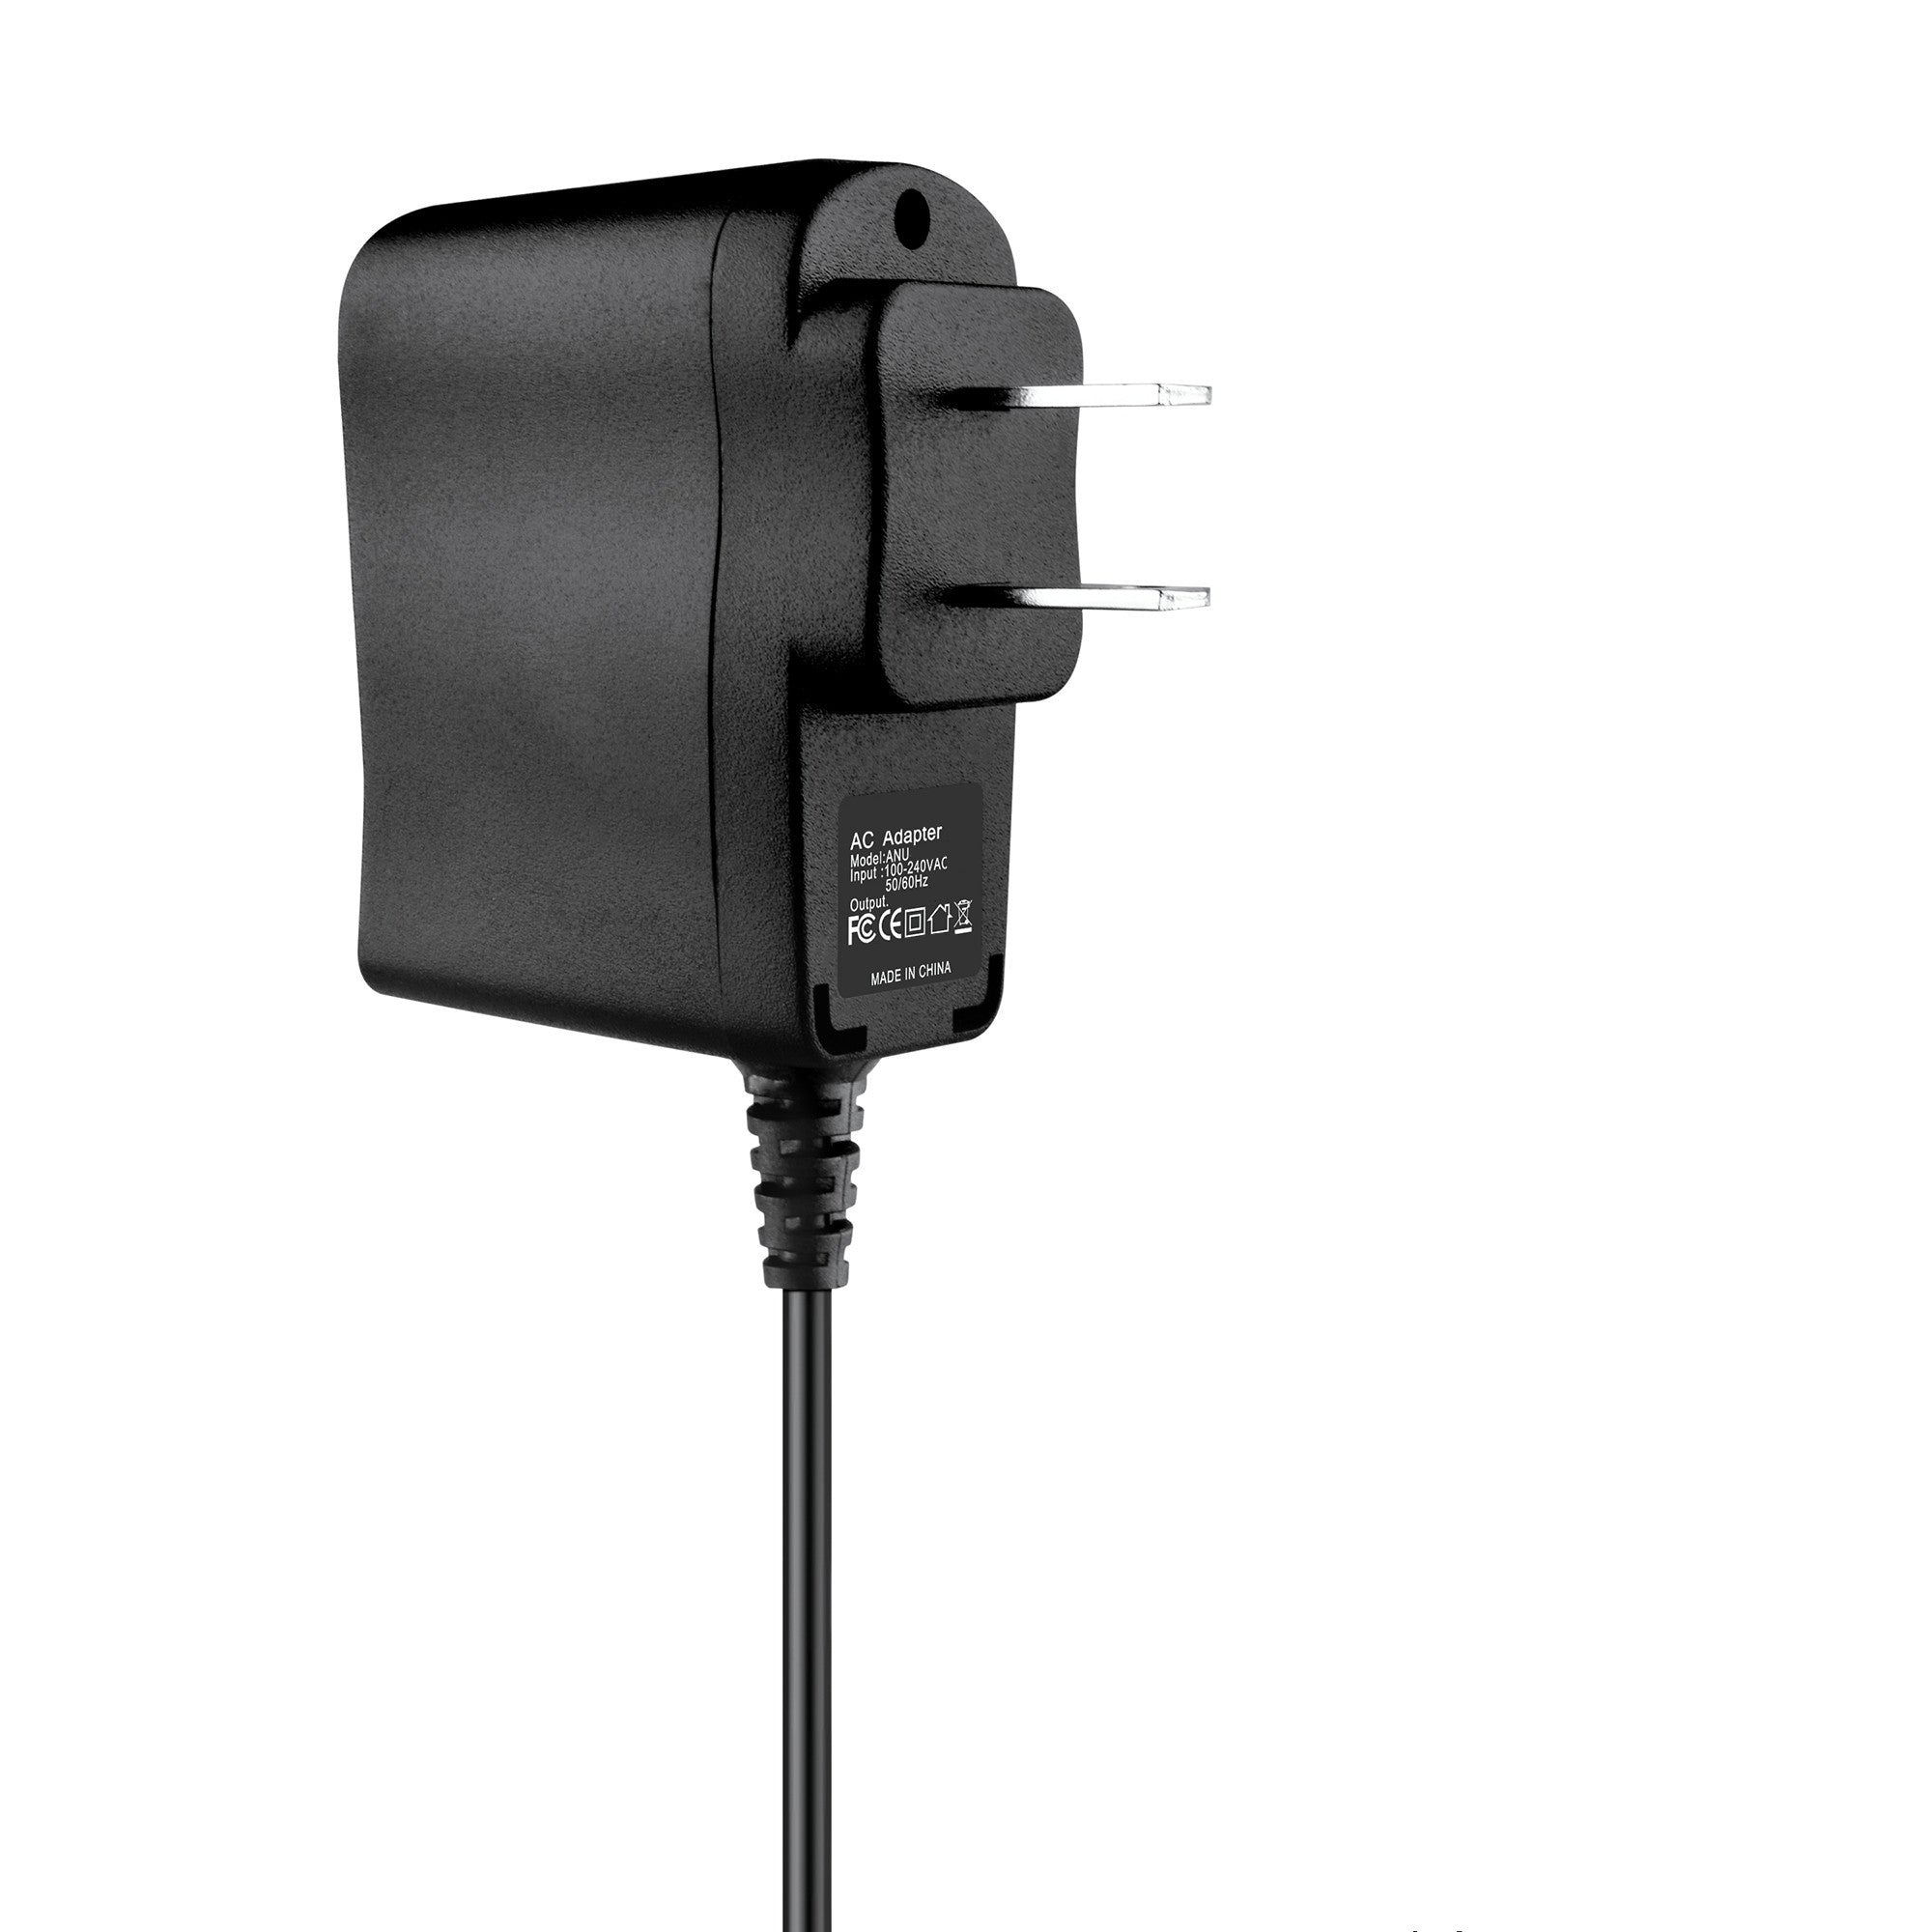 AbleGrid AC Adapter Compatible with DVE DSA-31S FUS 5050 Switching Power Supply Cord Cable Charger